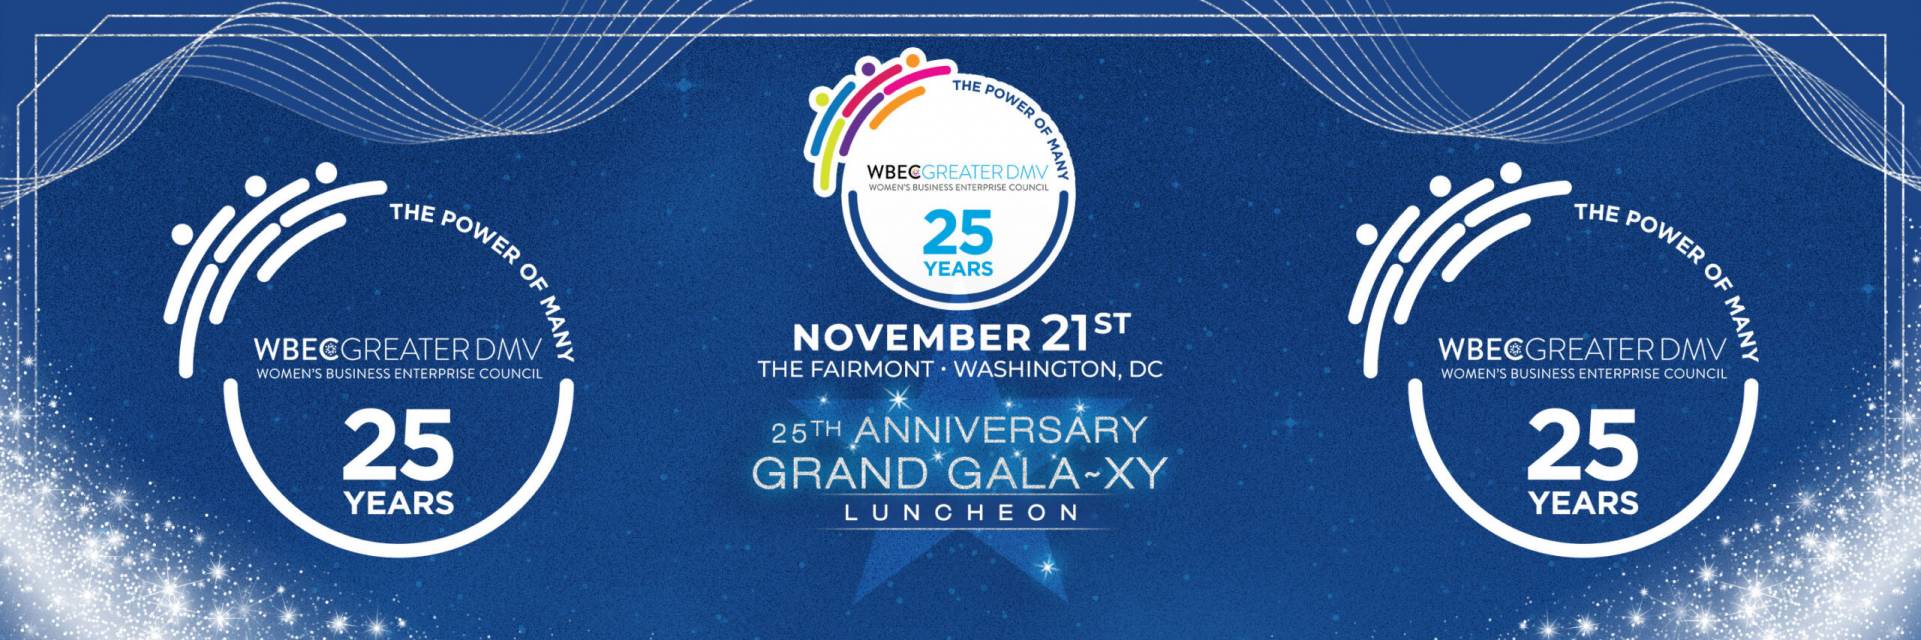 WBEC 25th Anniversary Grand Galaxy Luncheon details: September 20th, The Plaza, New York, NY